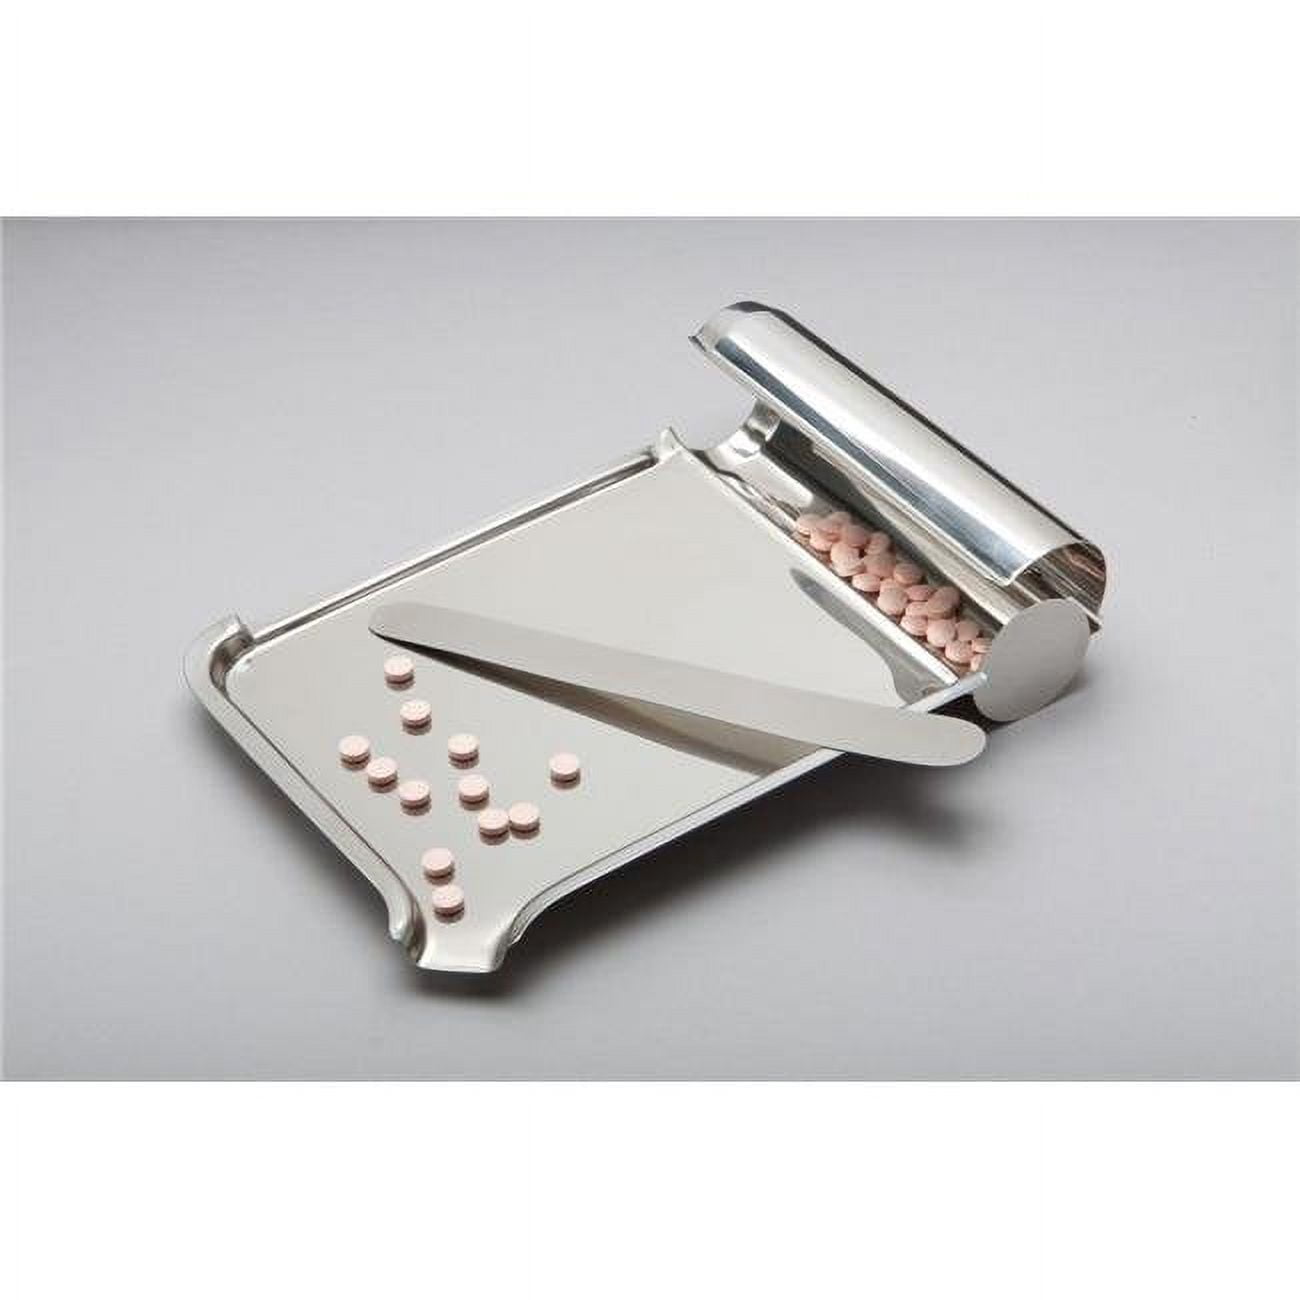 4280 Stainless Steel Pill Count Dish & Spatula